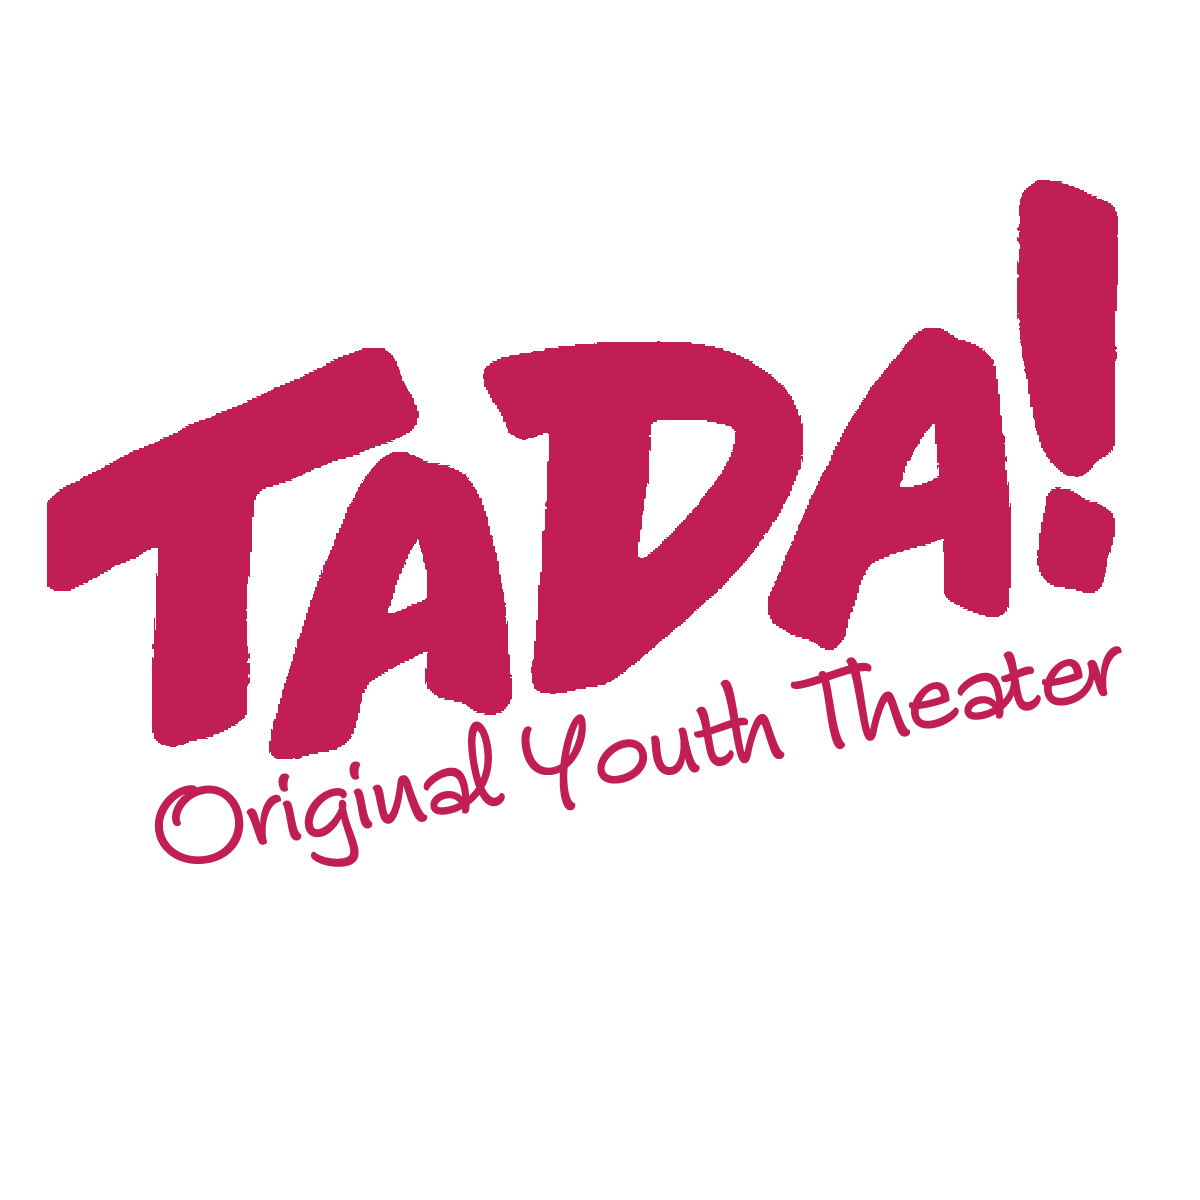 Raspberry+TADA+with+original+Youth+Theater+and+no+fractles.png